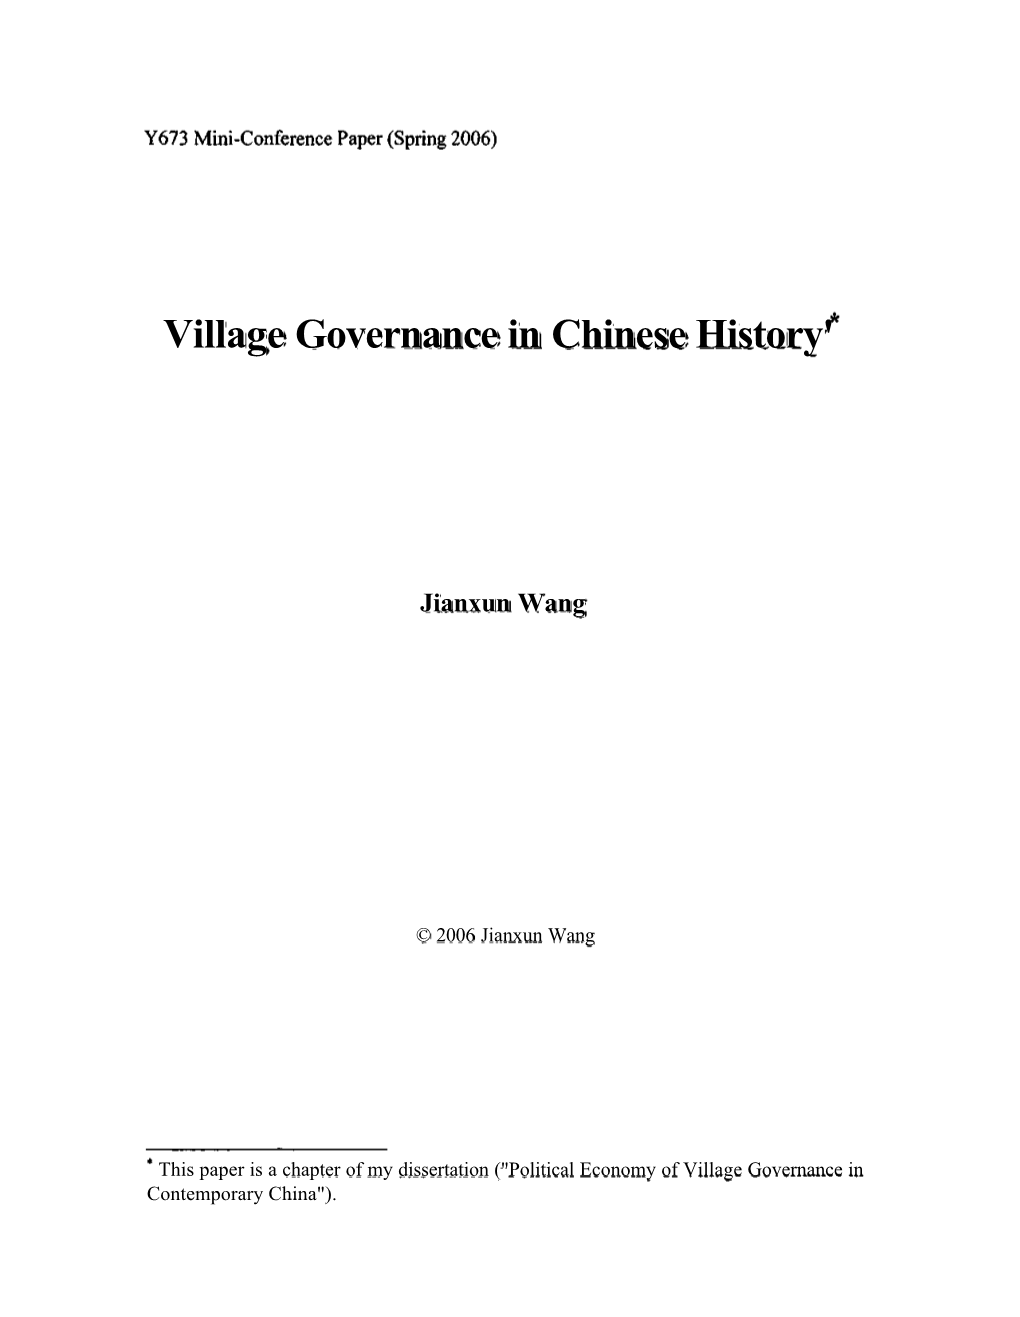 Village Governance in Chinese History'